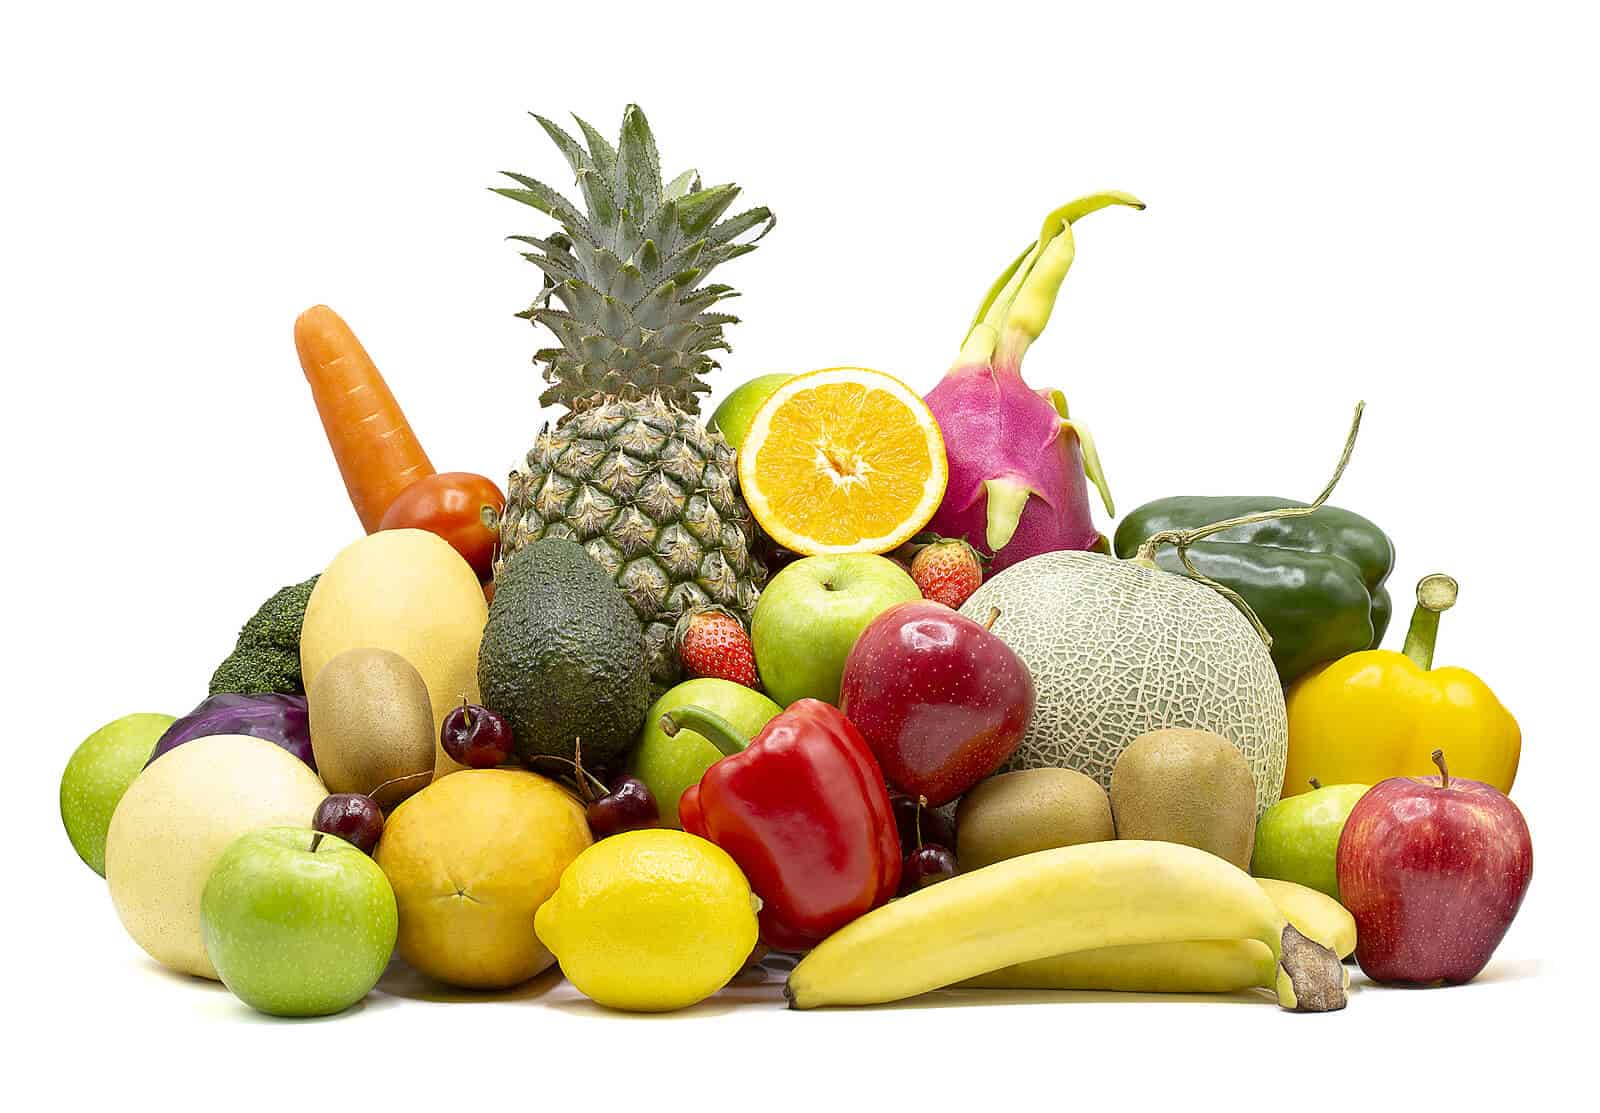 Featured image for “Local Fruits and Veggies to Arizona and How to Incorporate Them Into Dishes”